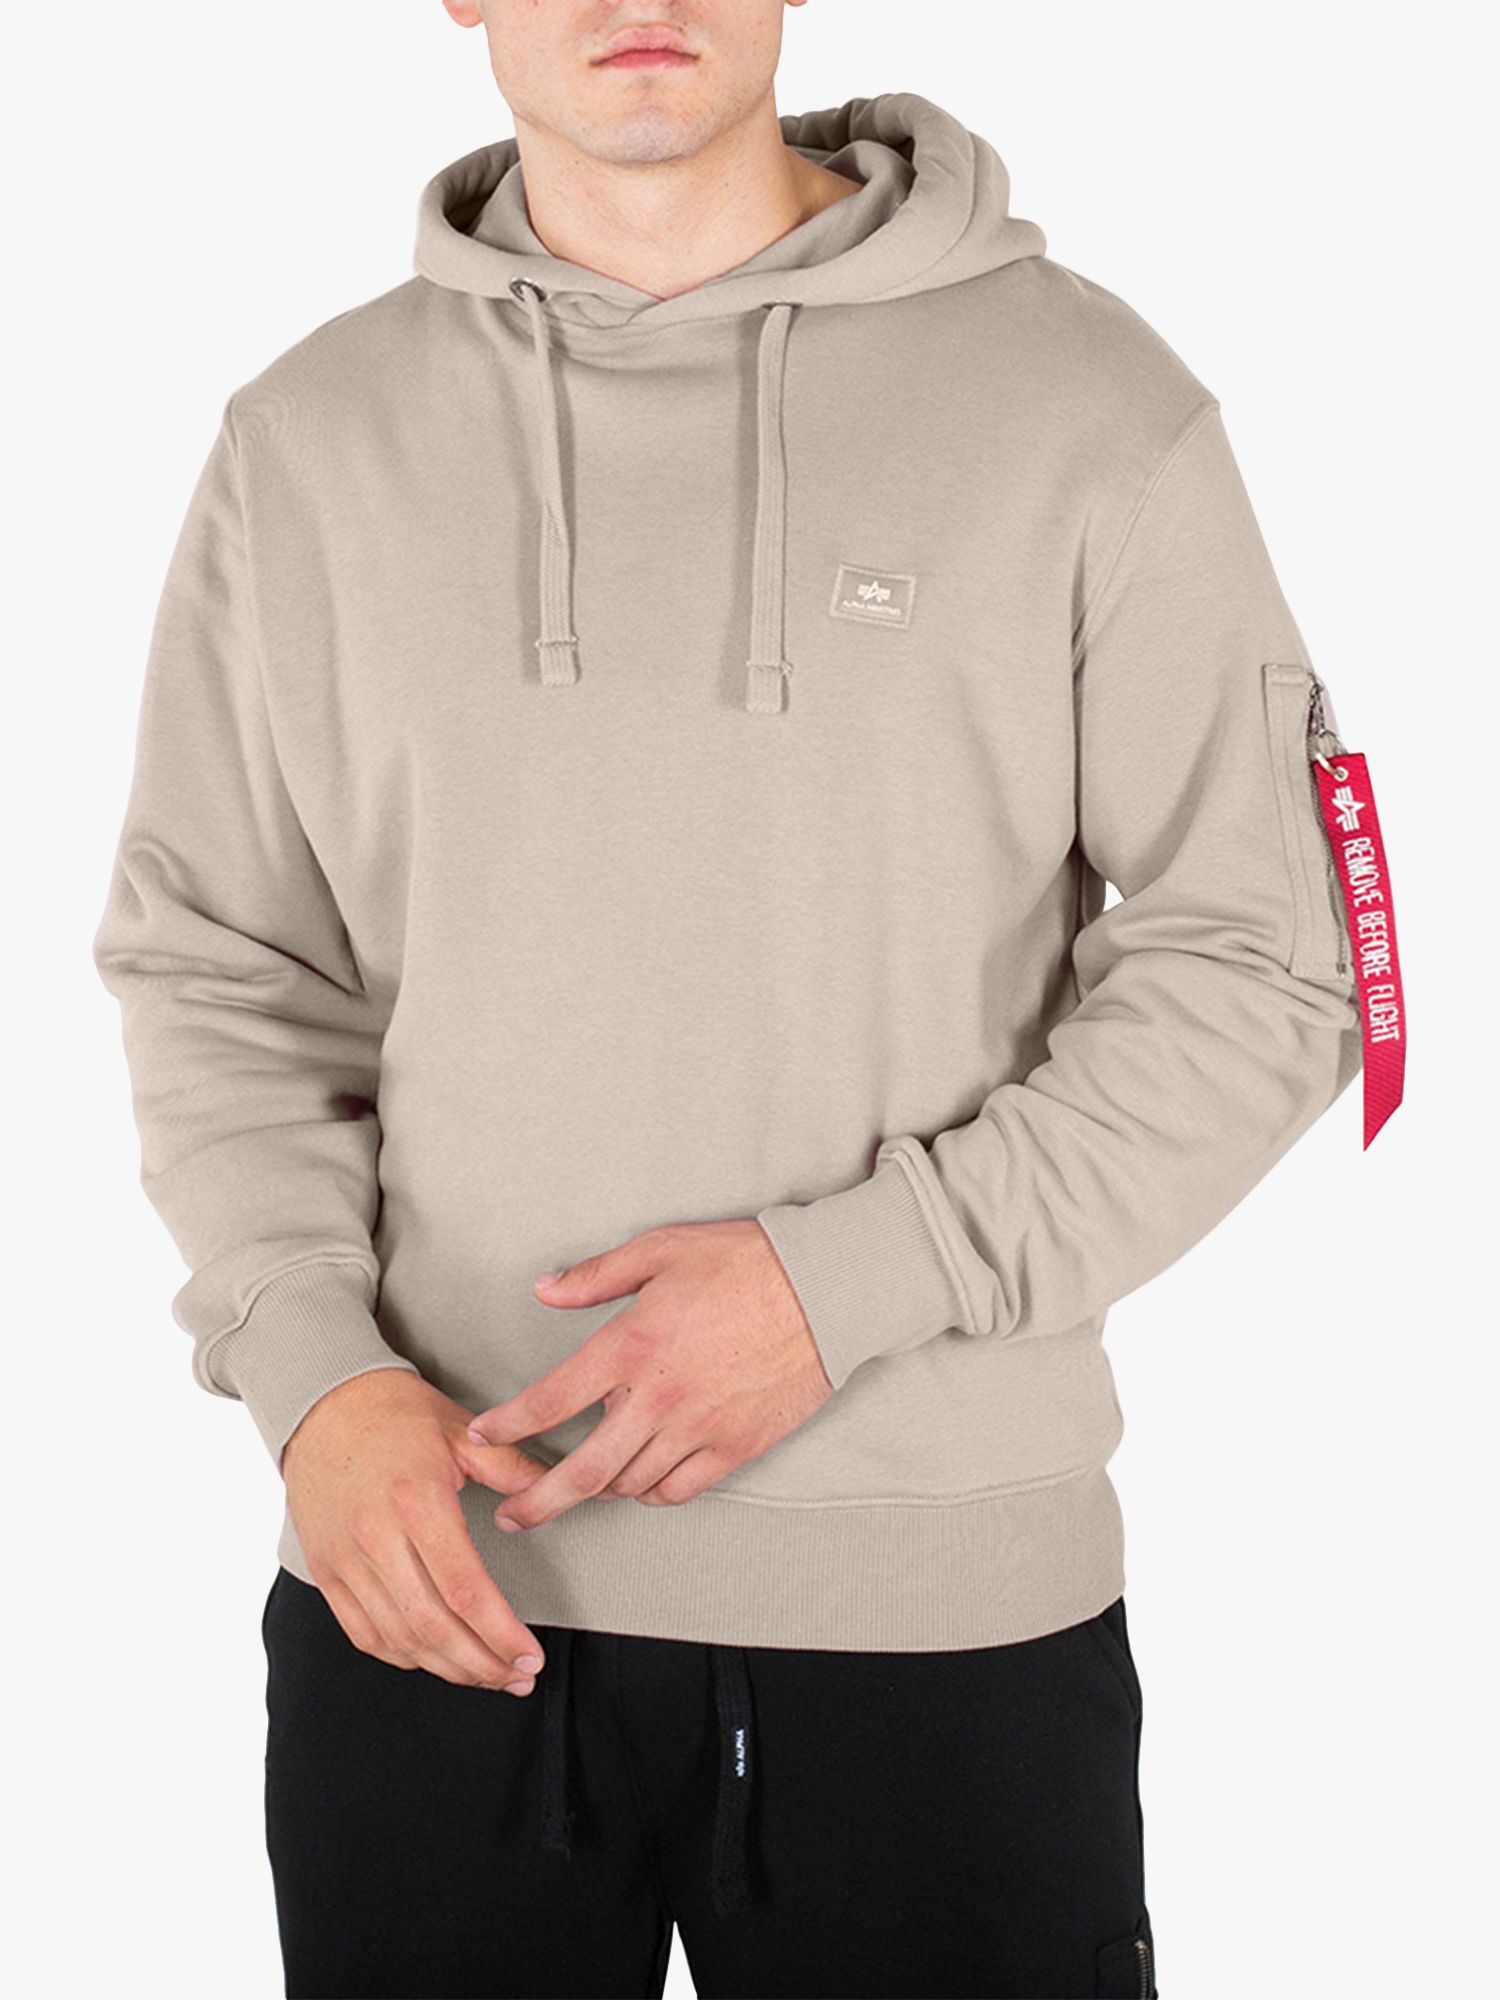 Alpha Industries X-Fit Hoodie, at John Lewis White Partners Stream Jet & 578